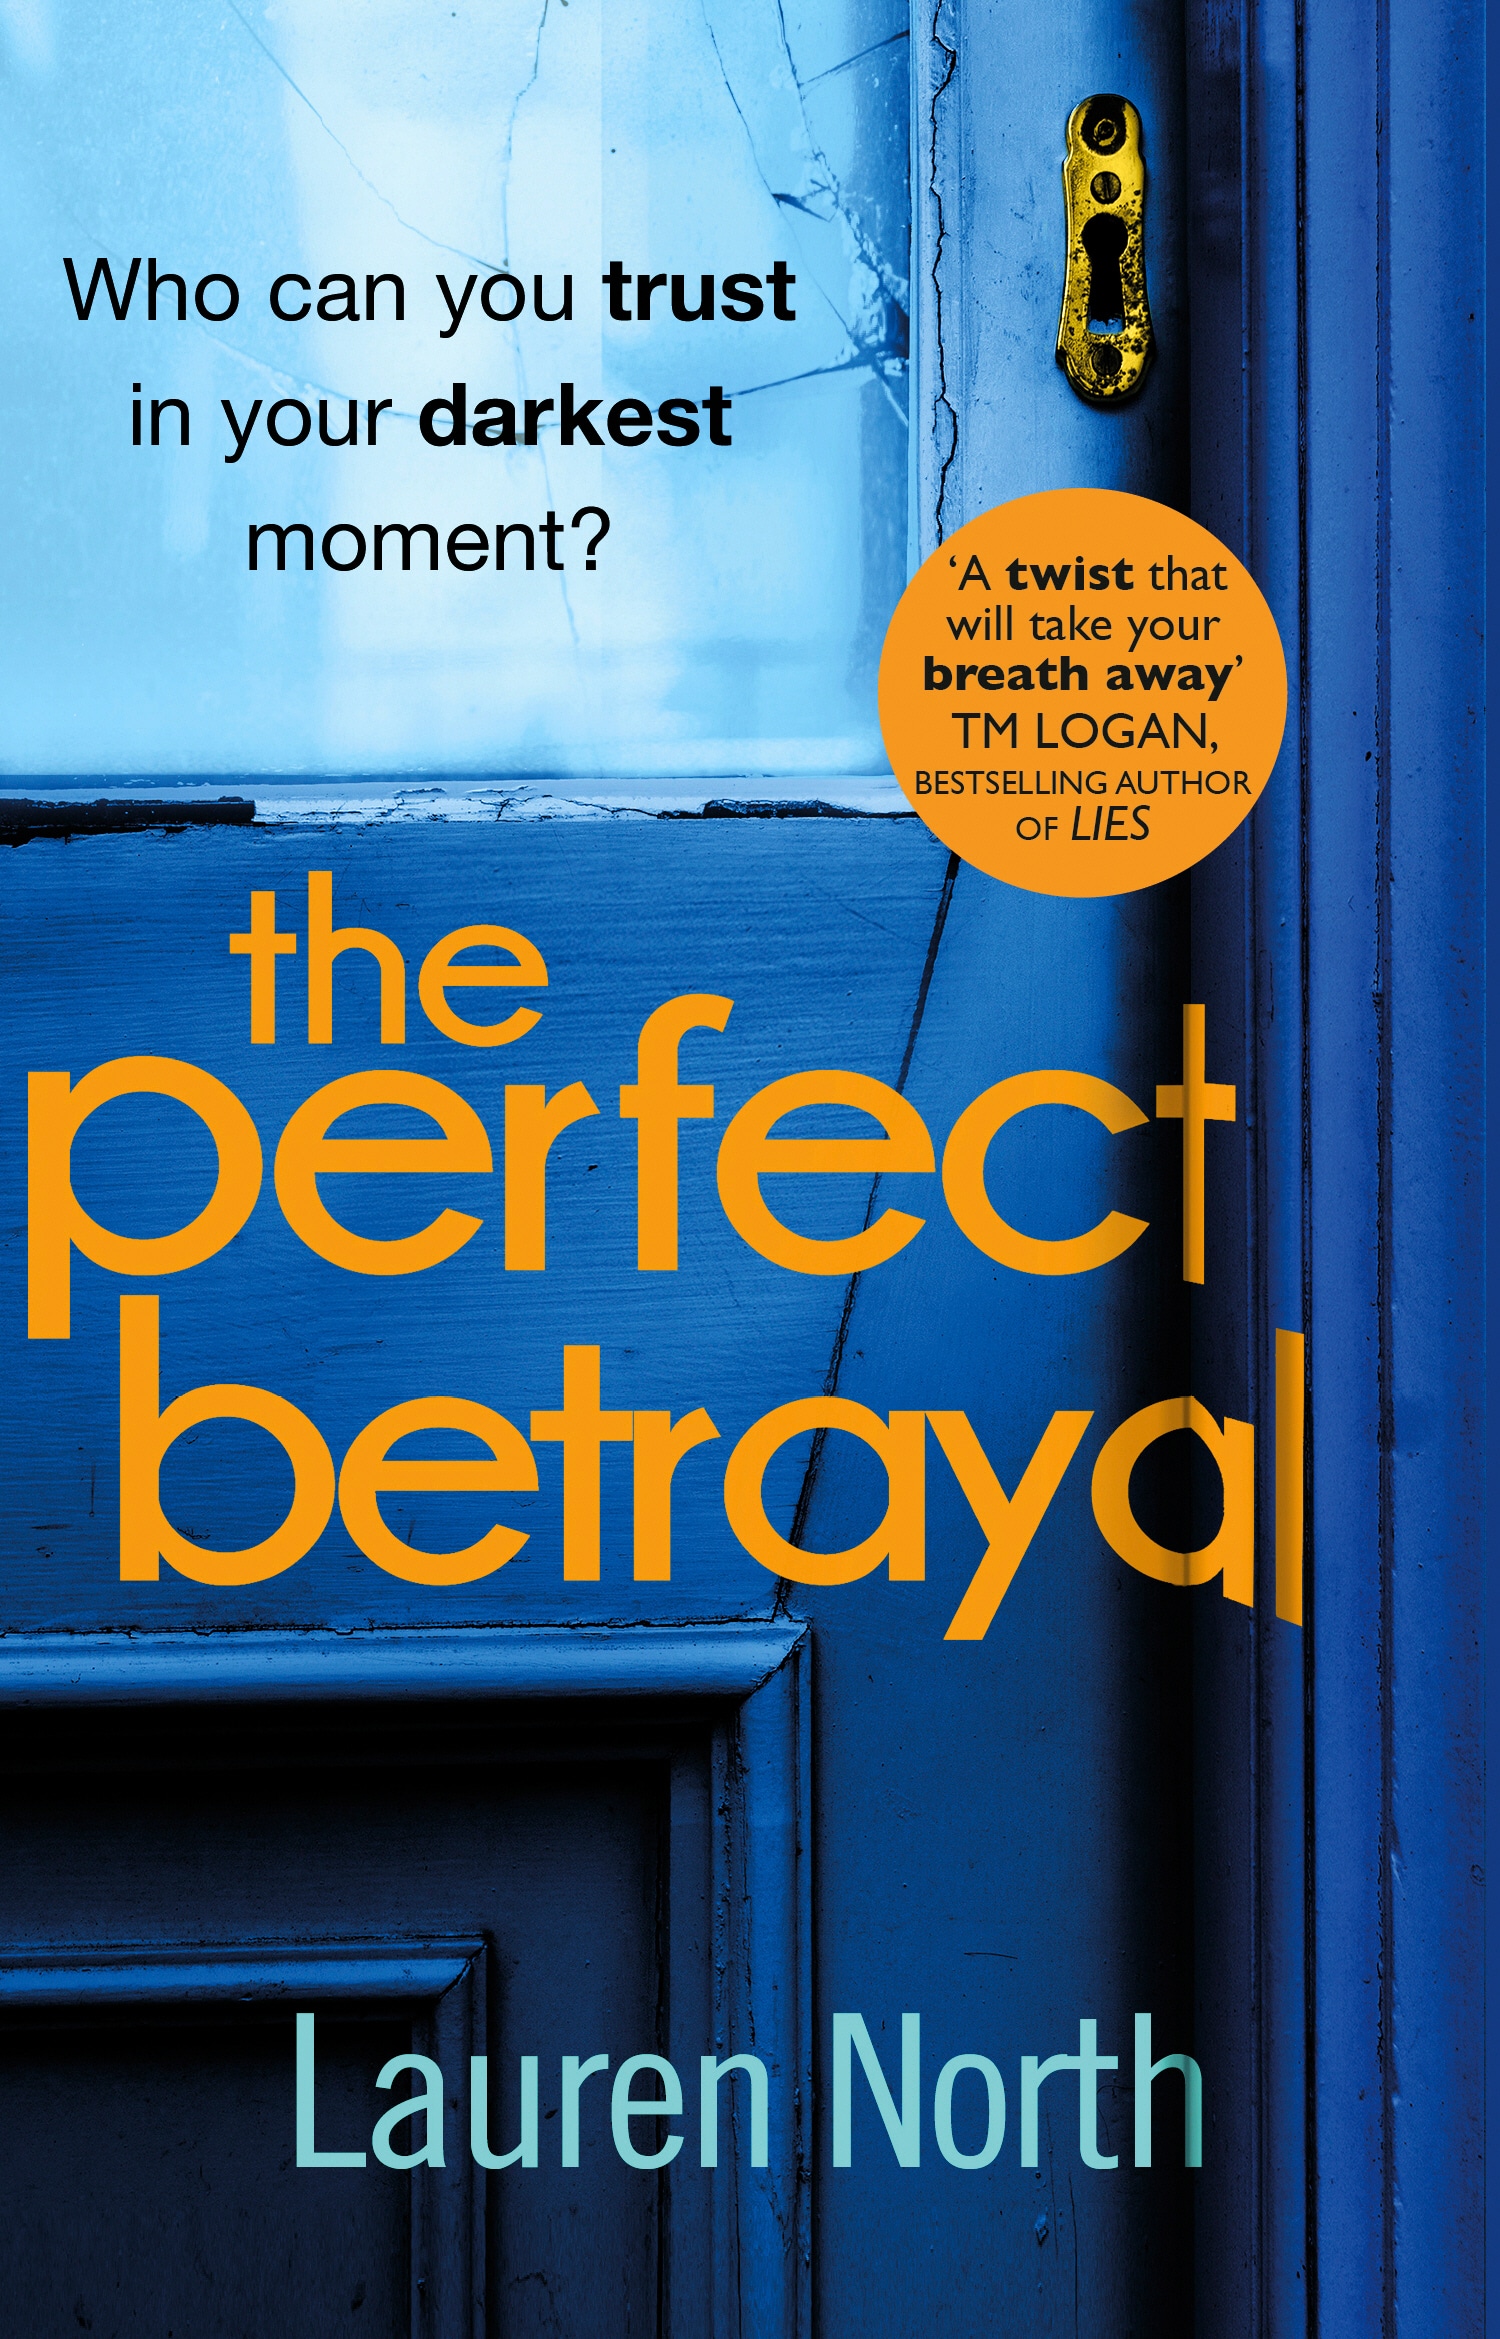 Book “The Perfect Betrayal” by Lauren North — June 27, 2019